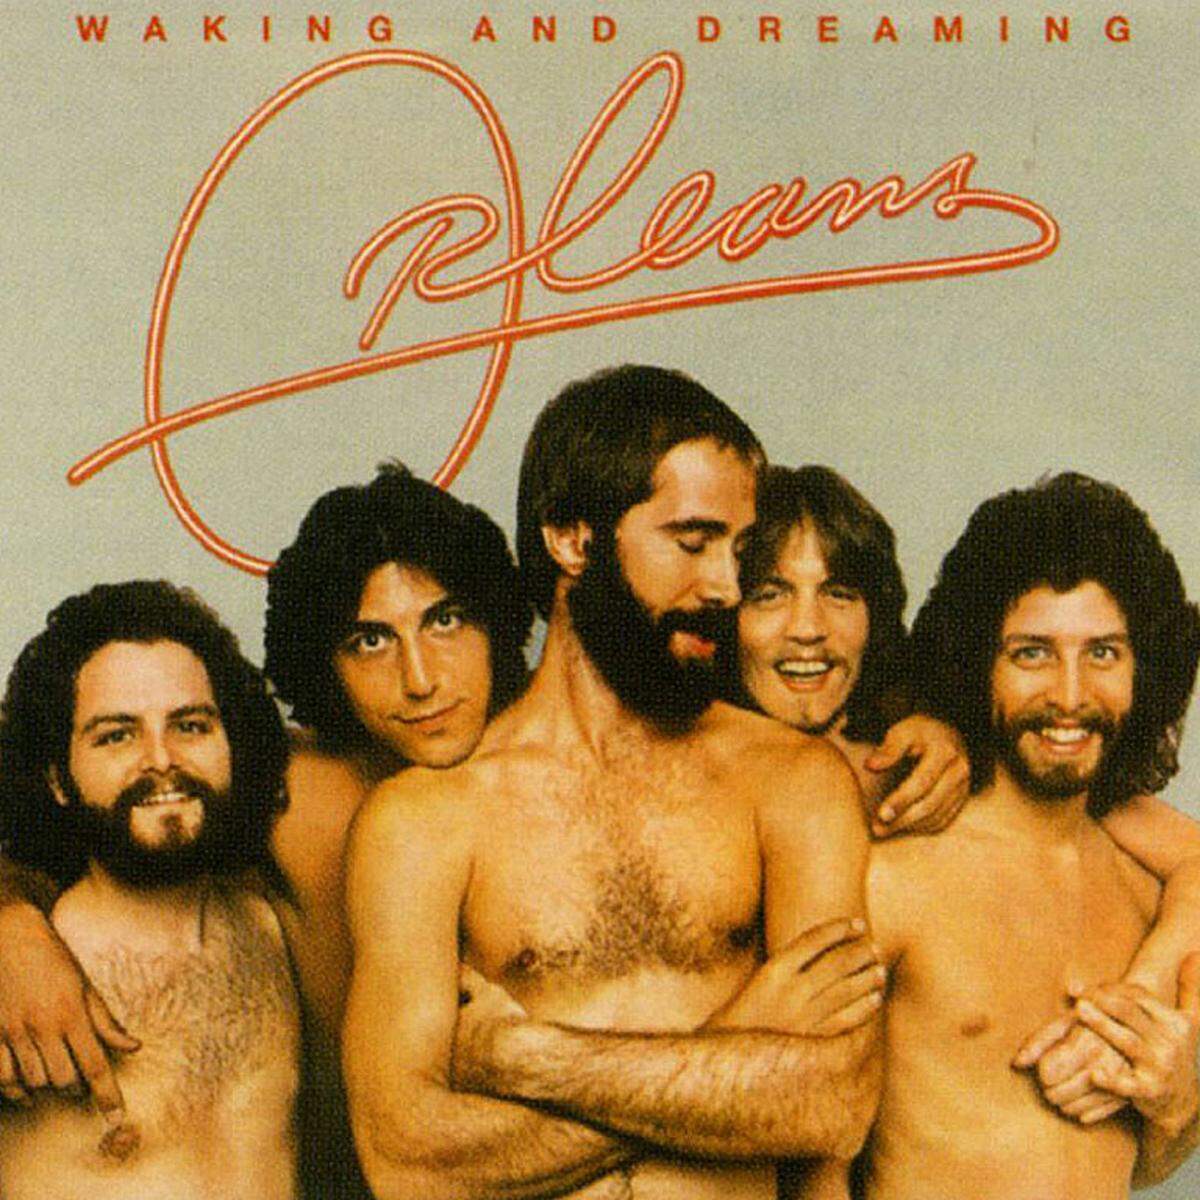 Orleans - Waking And Dreaming (1976)